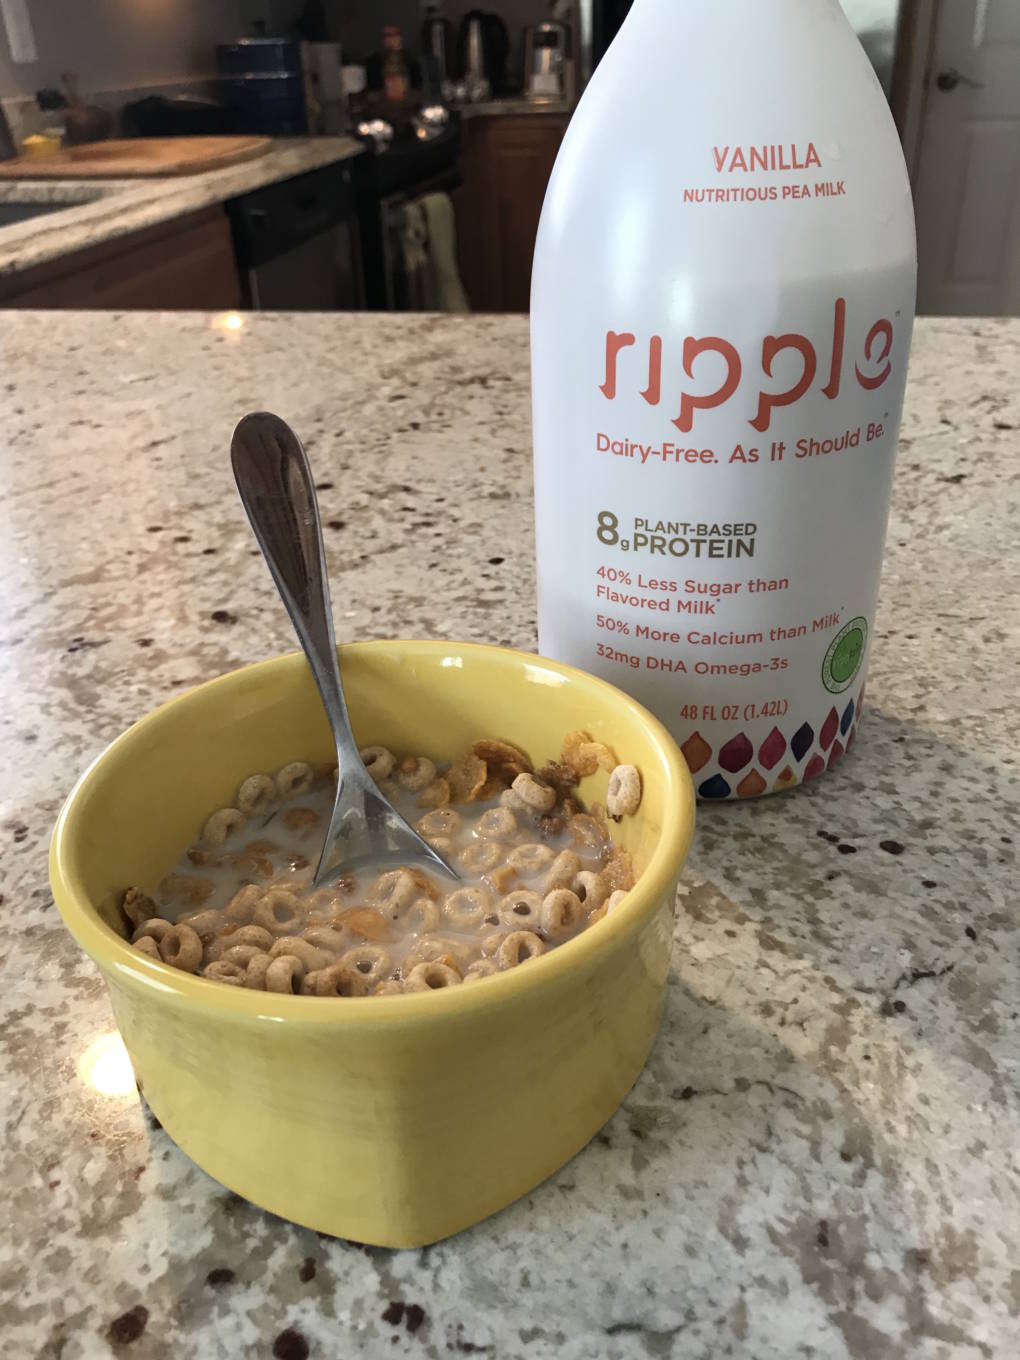 Ripple's pea-based milk contains 8 grams of protein per cup, the same amount as in a cup of cow's milk.